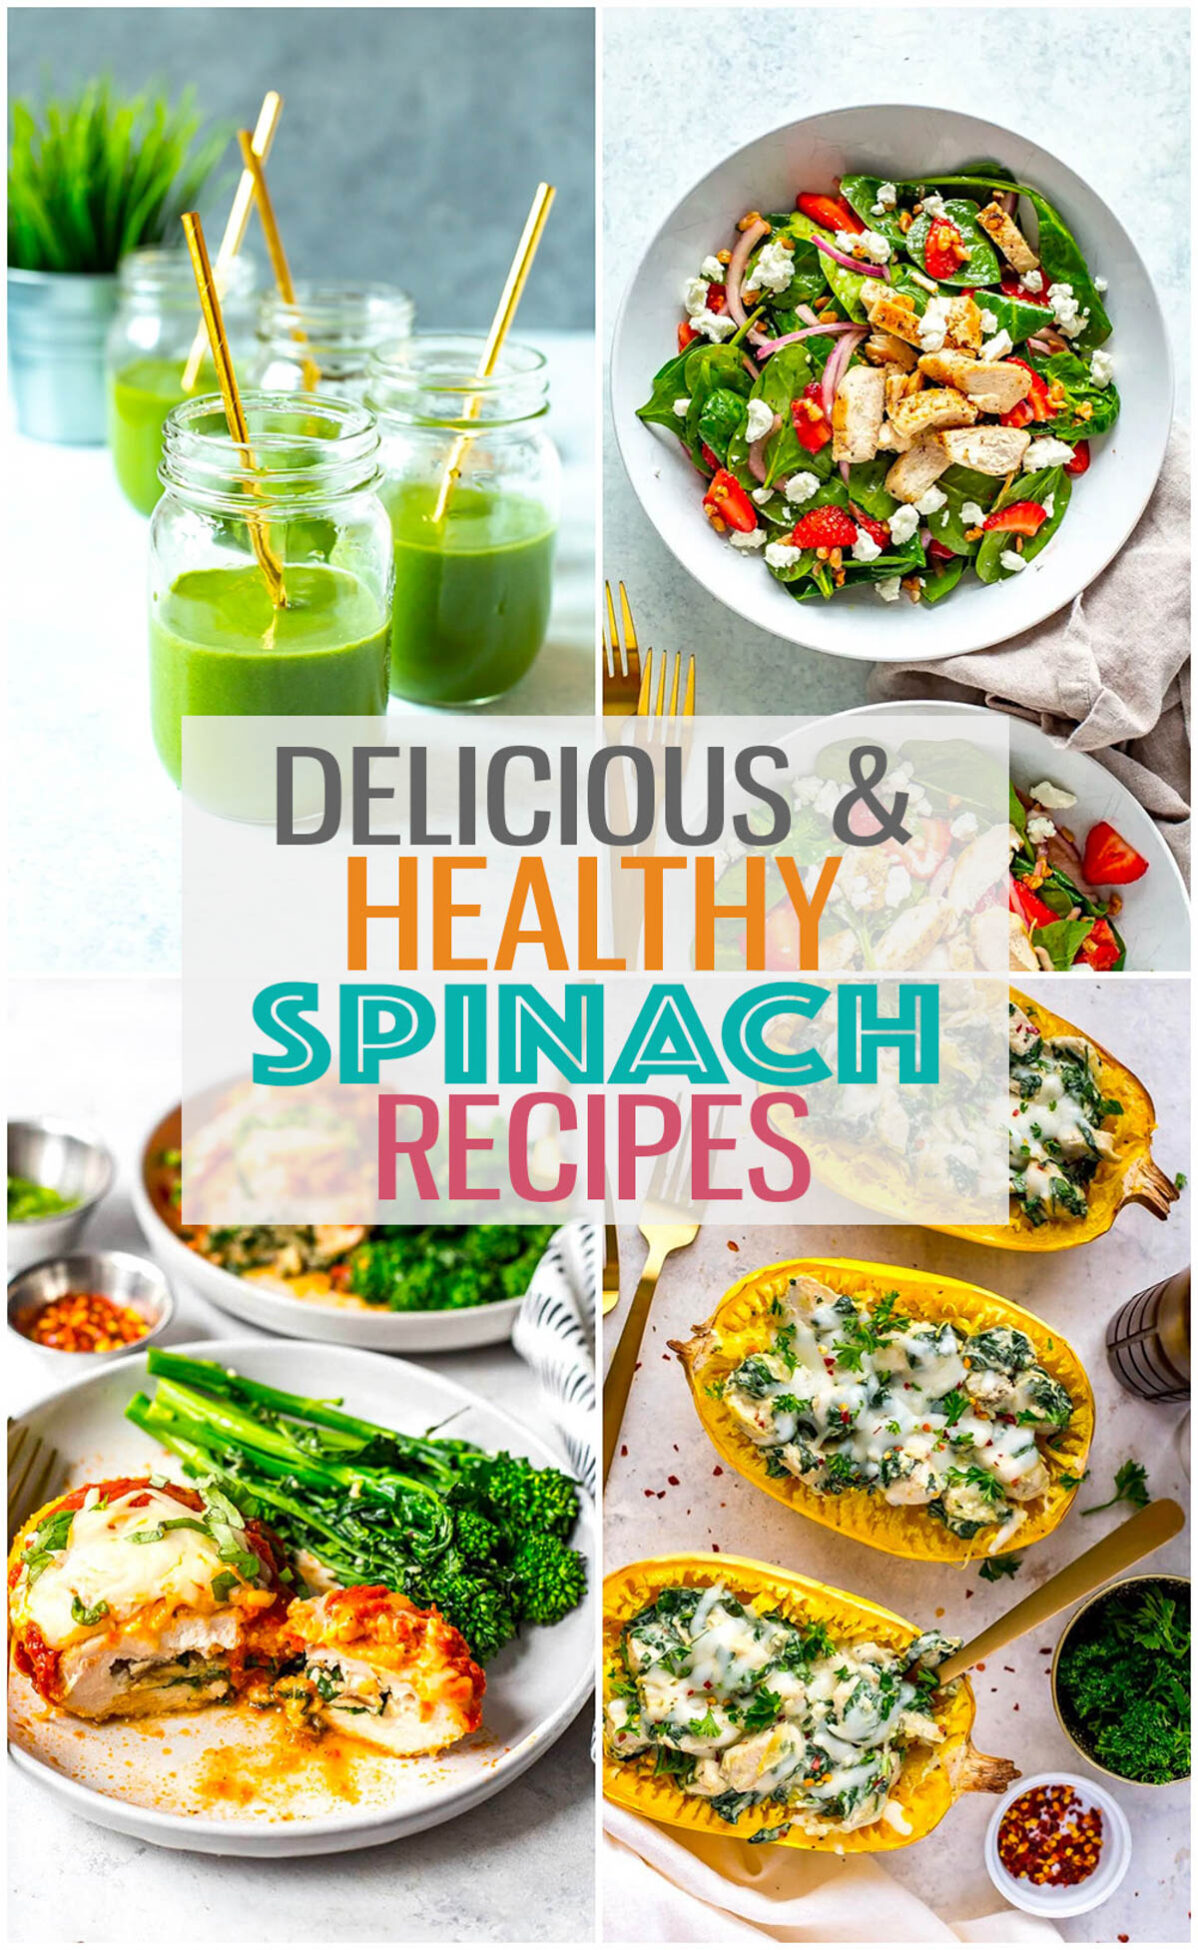 A collage of 4 different spinach recipes with the text "Delicious & Healthy Spinach Recipes" layered over top.